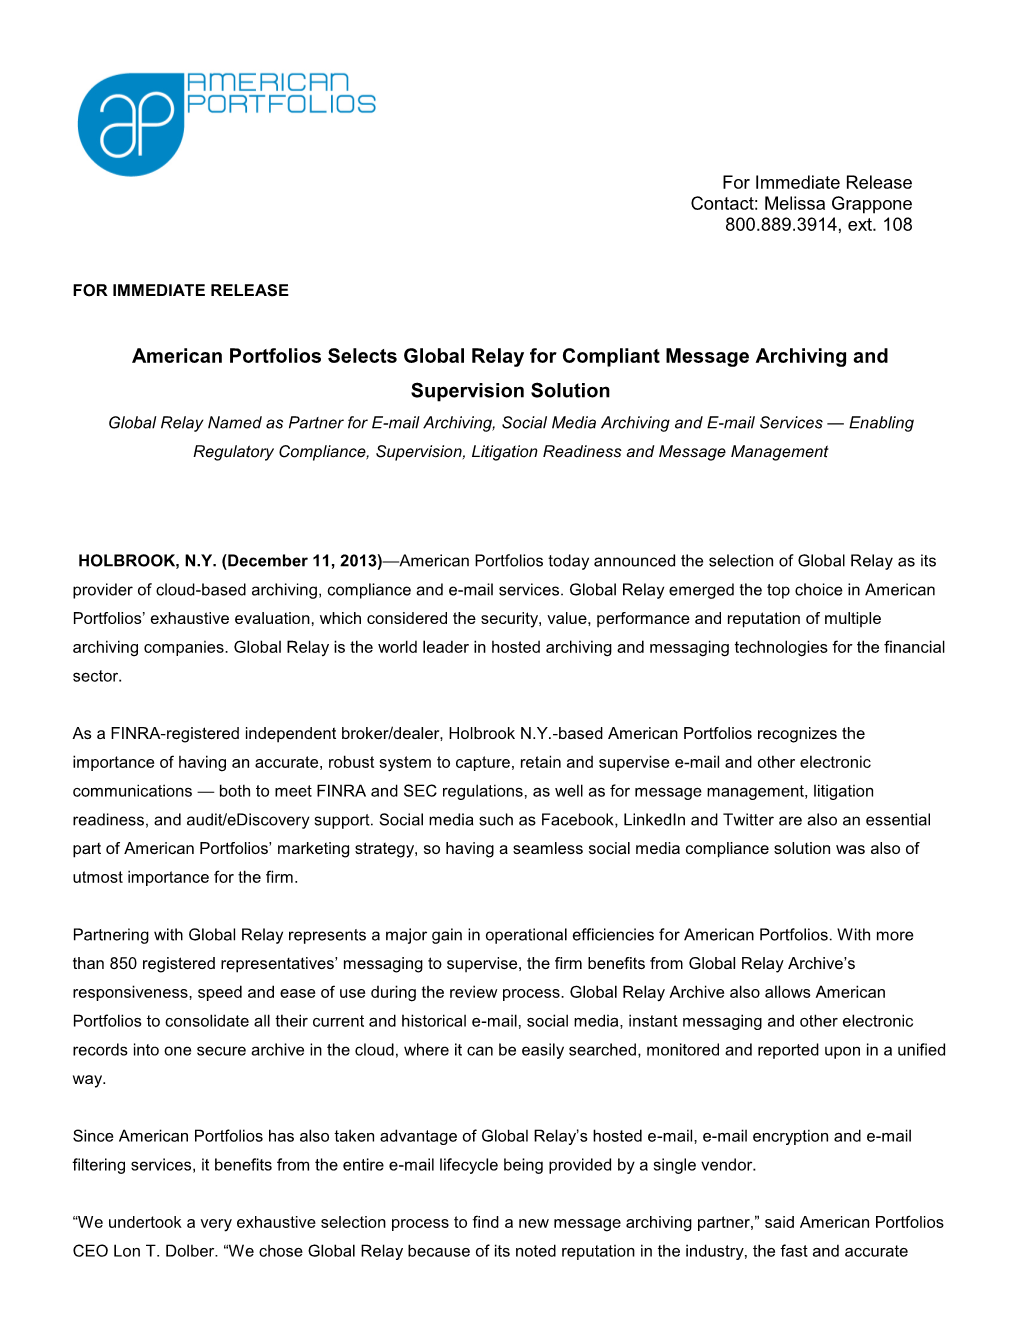 American Portfolios Selects Global Relay for Compliant Message